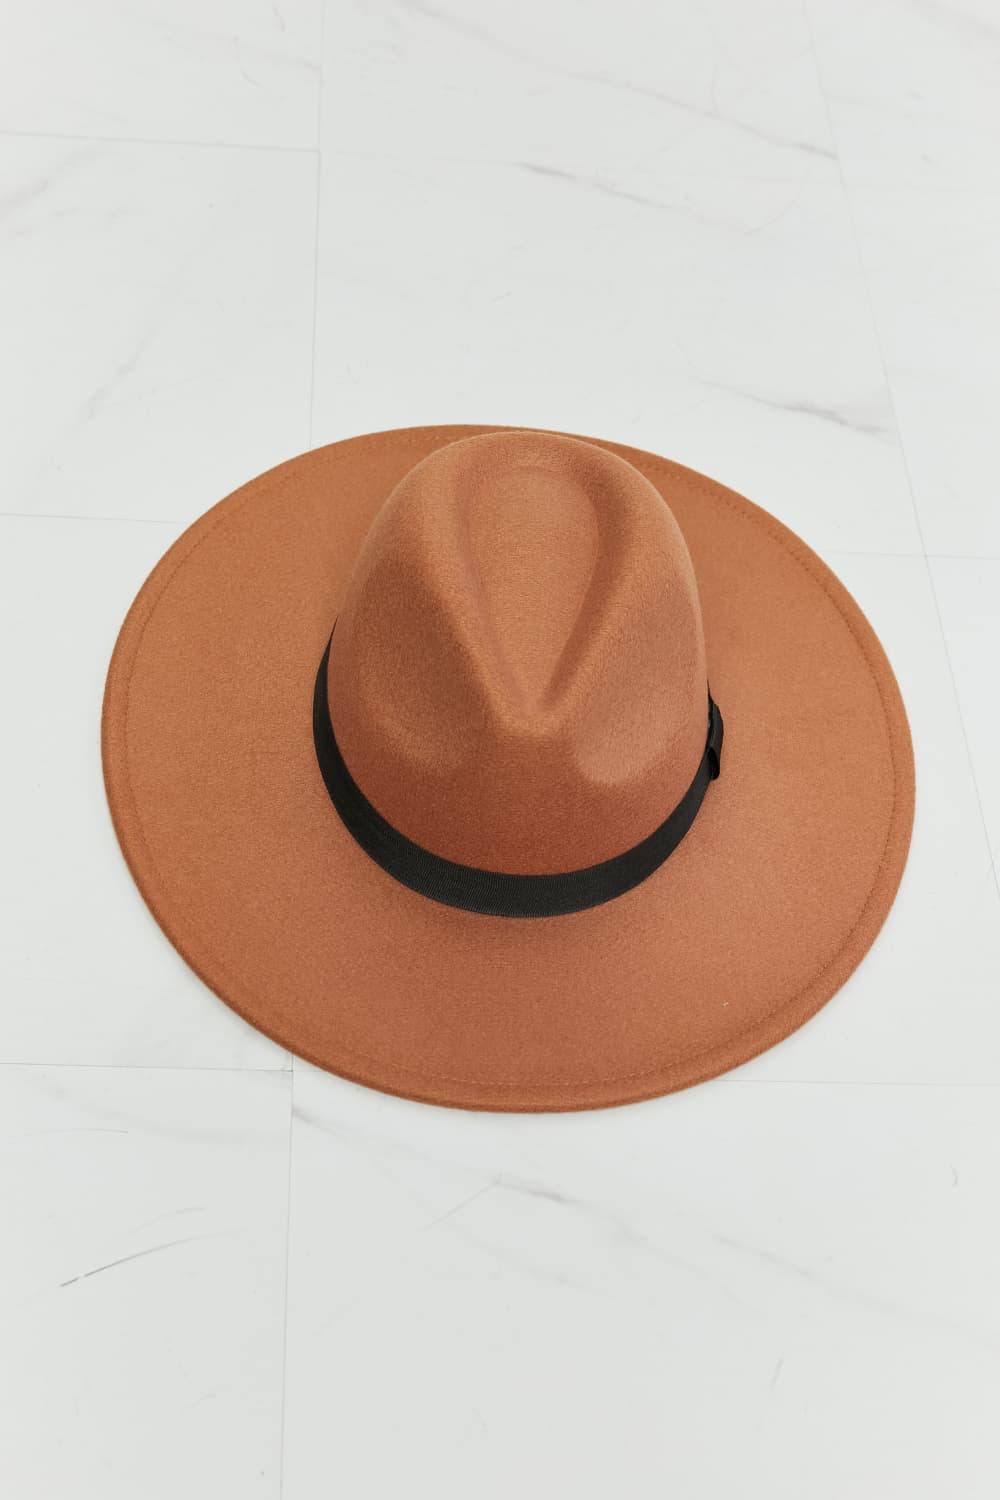 Fame Enjoy The Simple Things Fedora Hat Print on any thing USA/STOD clothes